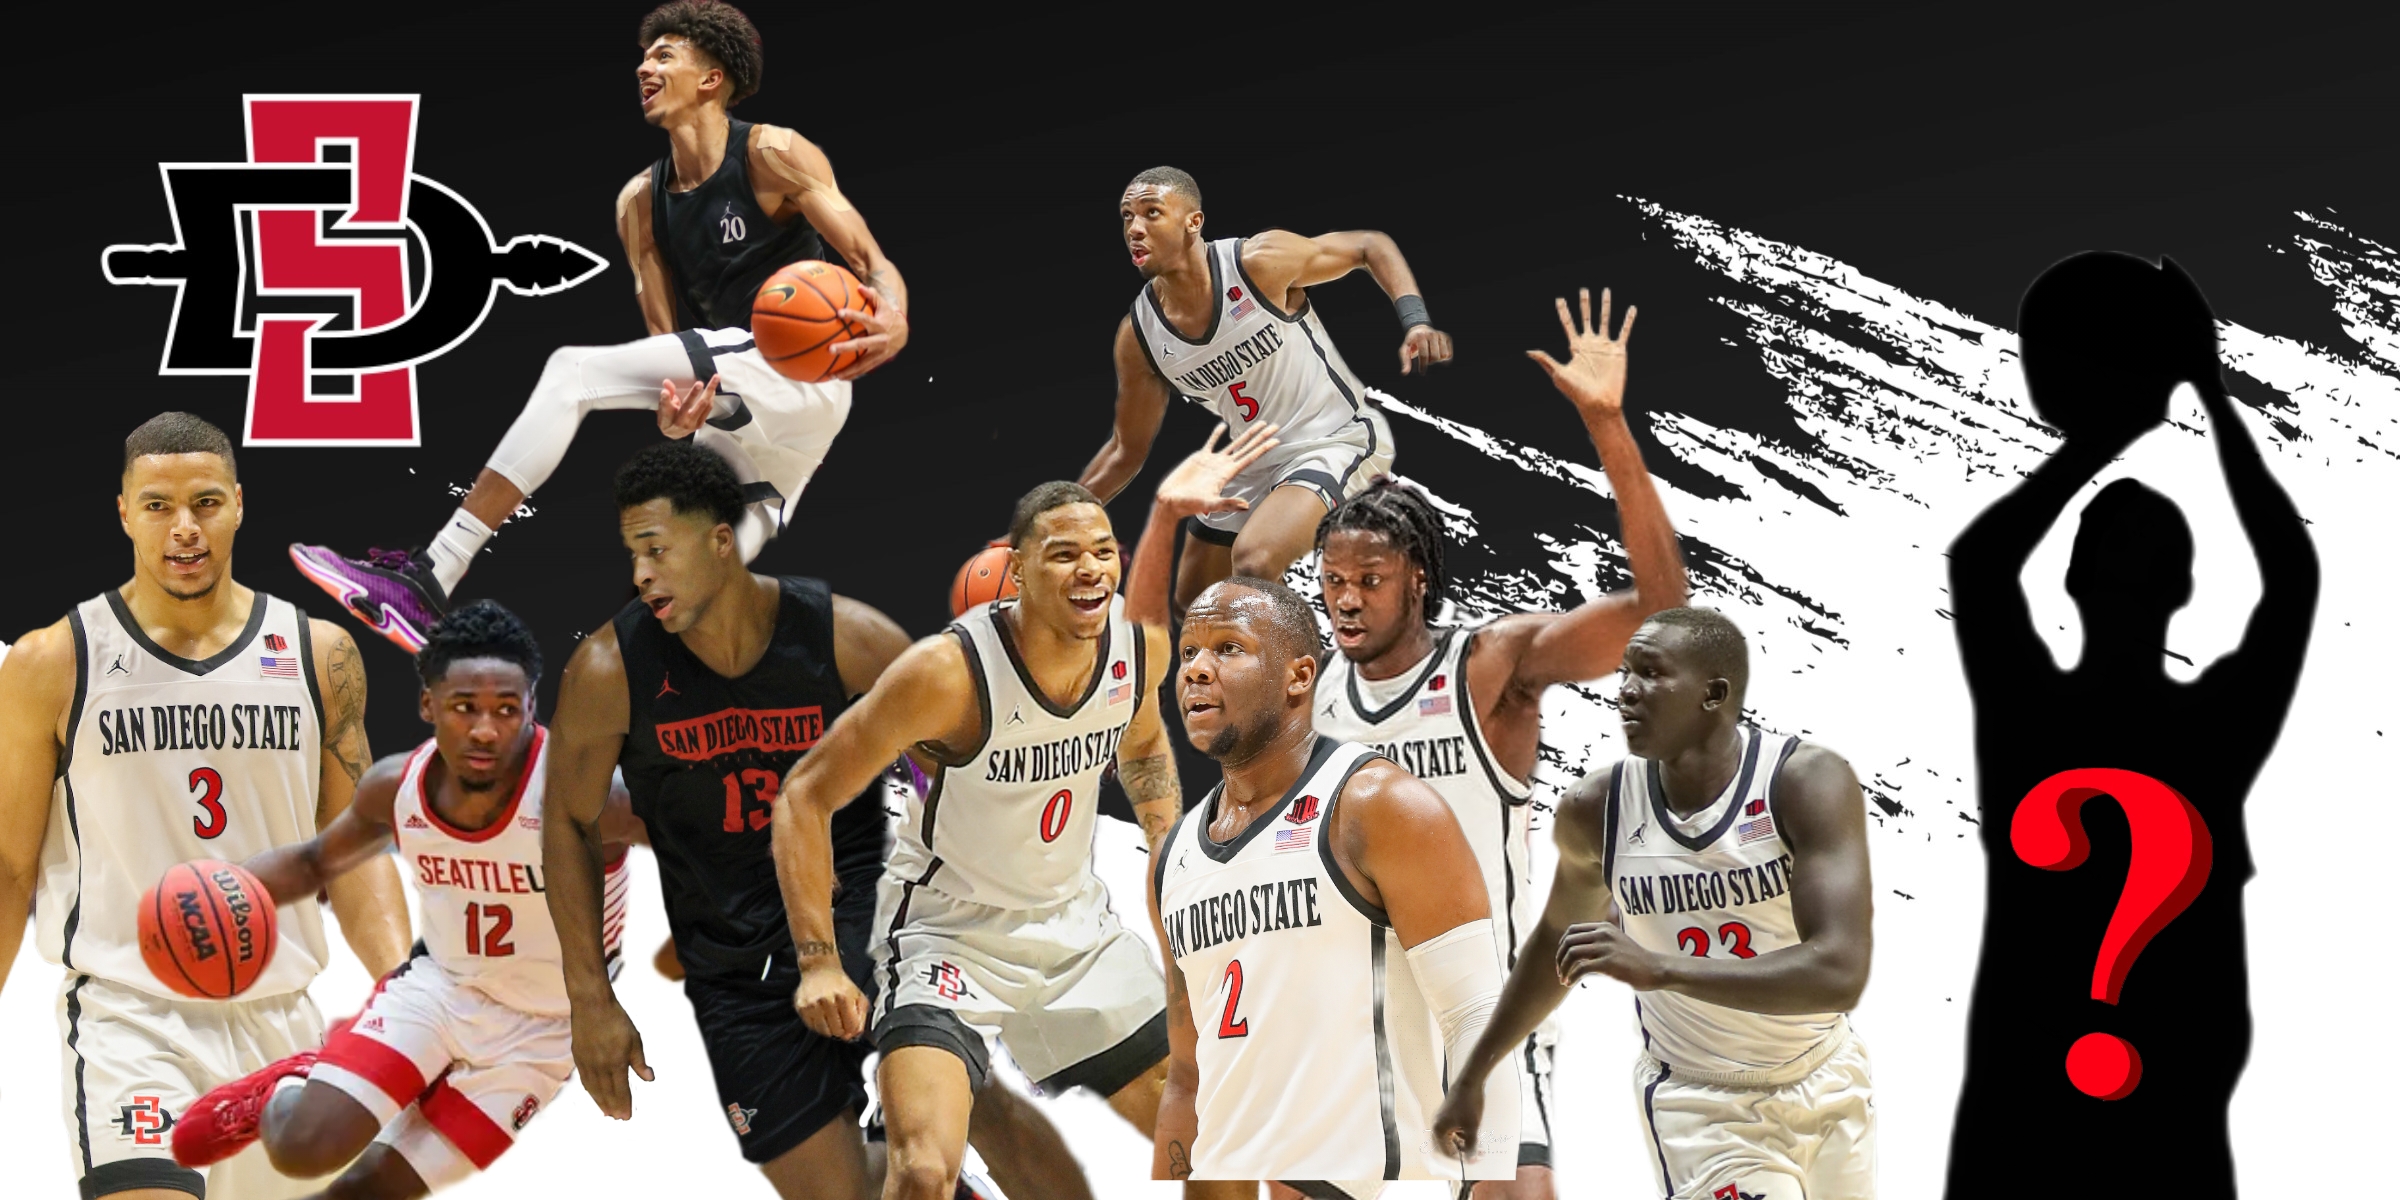 The top 25 returning men's basketball players for the 2022-2023 season,  ranked by Andy Katz